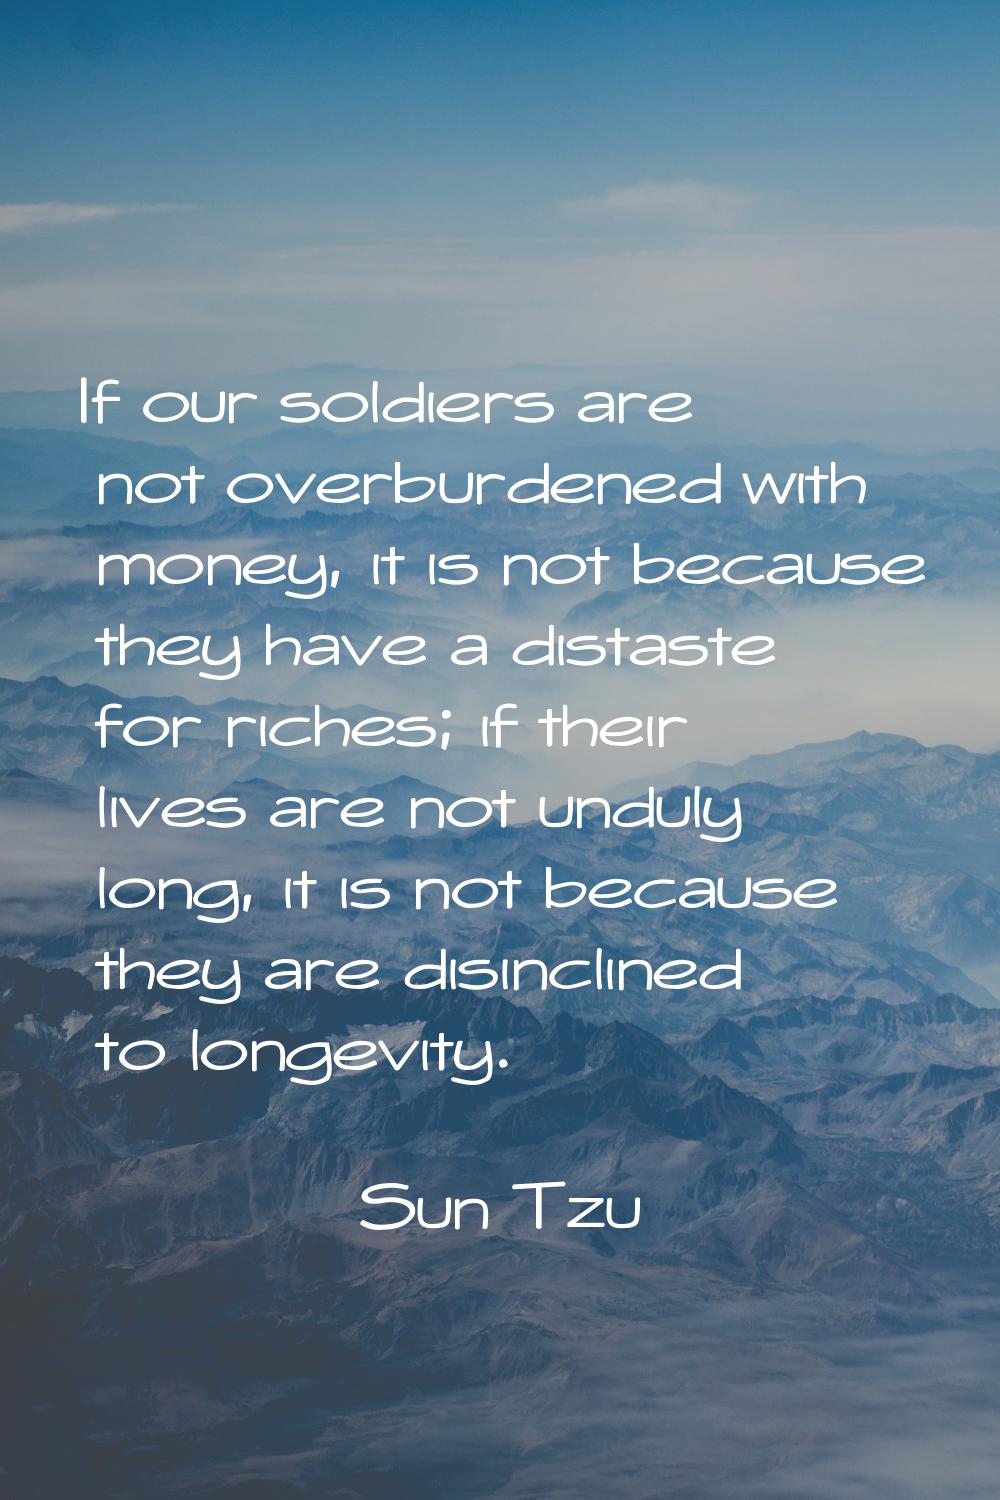 If our soldiers are not overburdened with money, it is not because they have a distaste for riches;